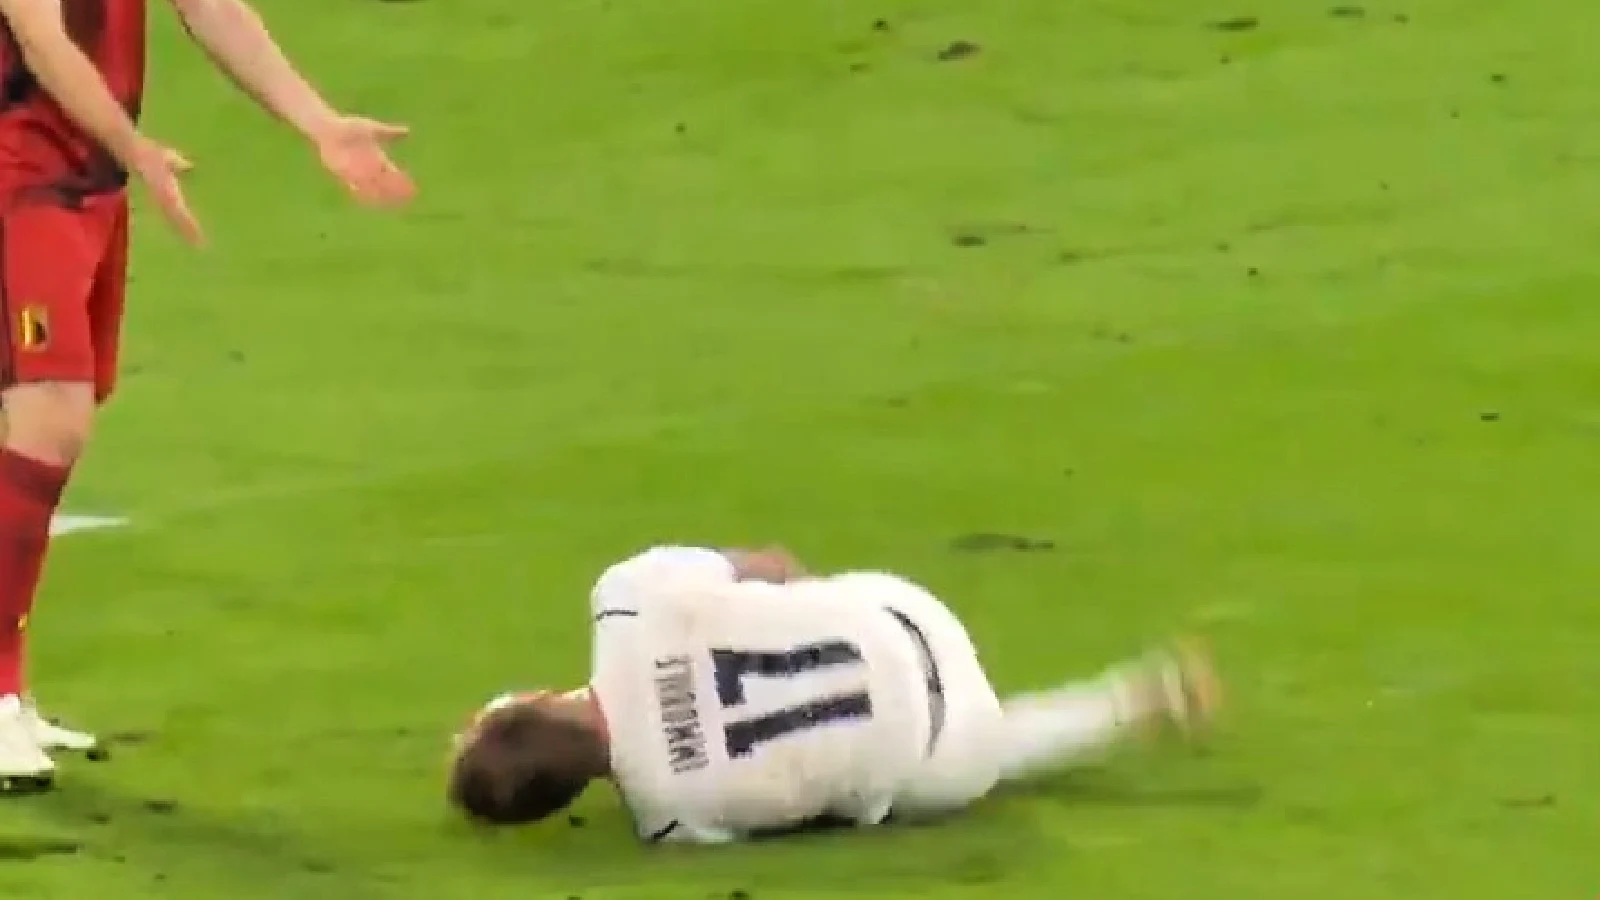 Ciro Immobile lying on the ground faking an injury against Belgium